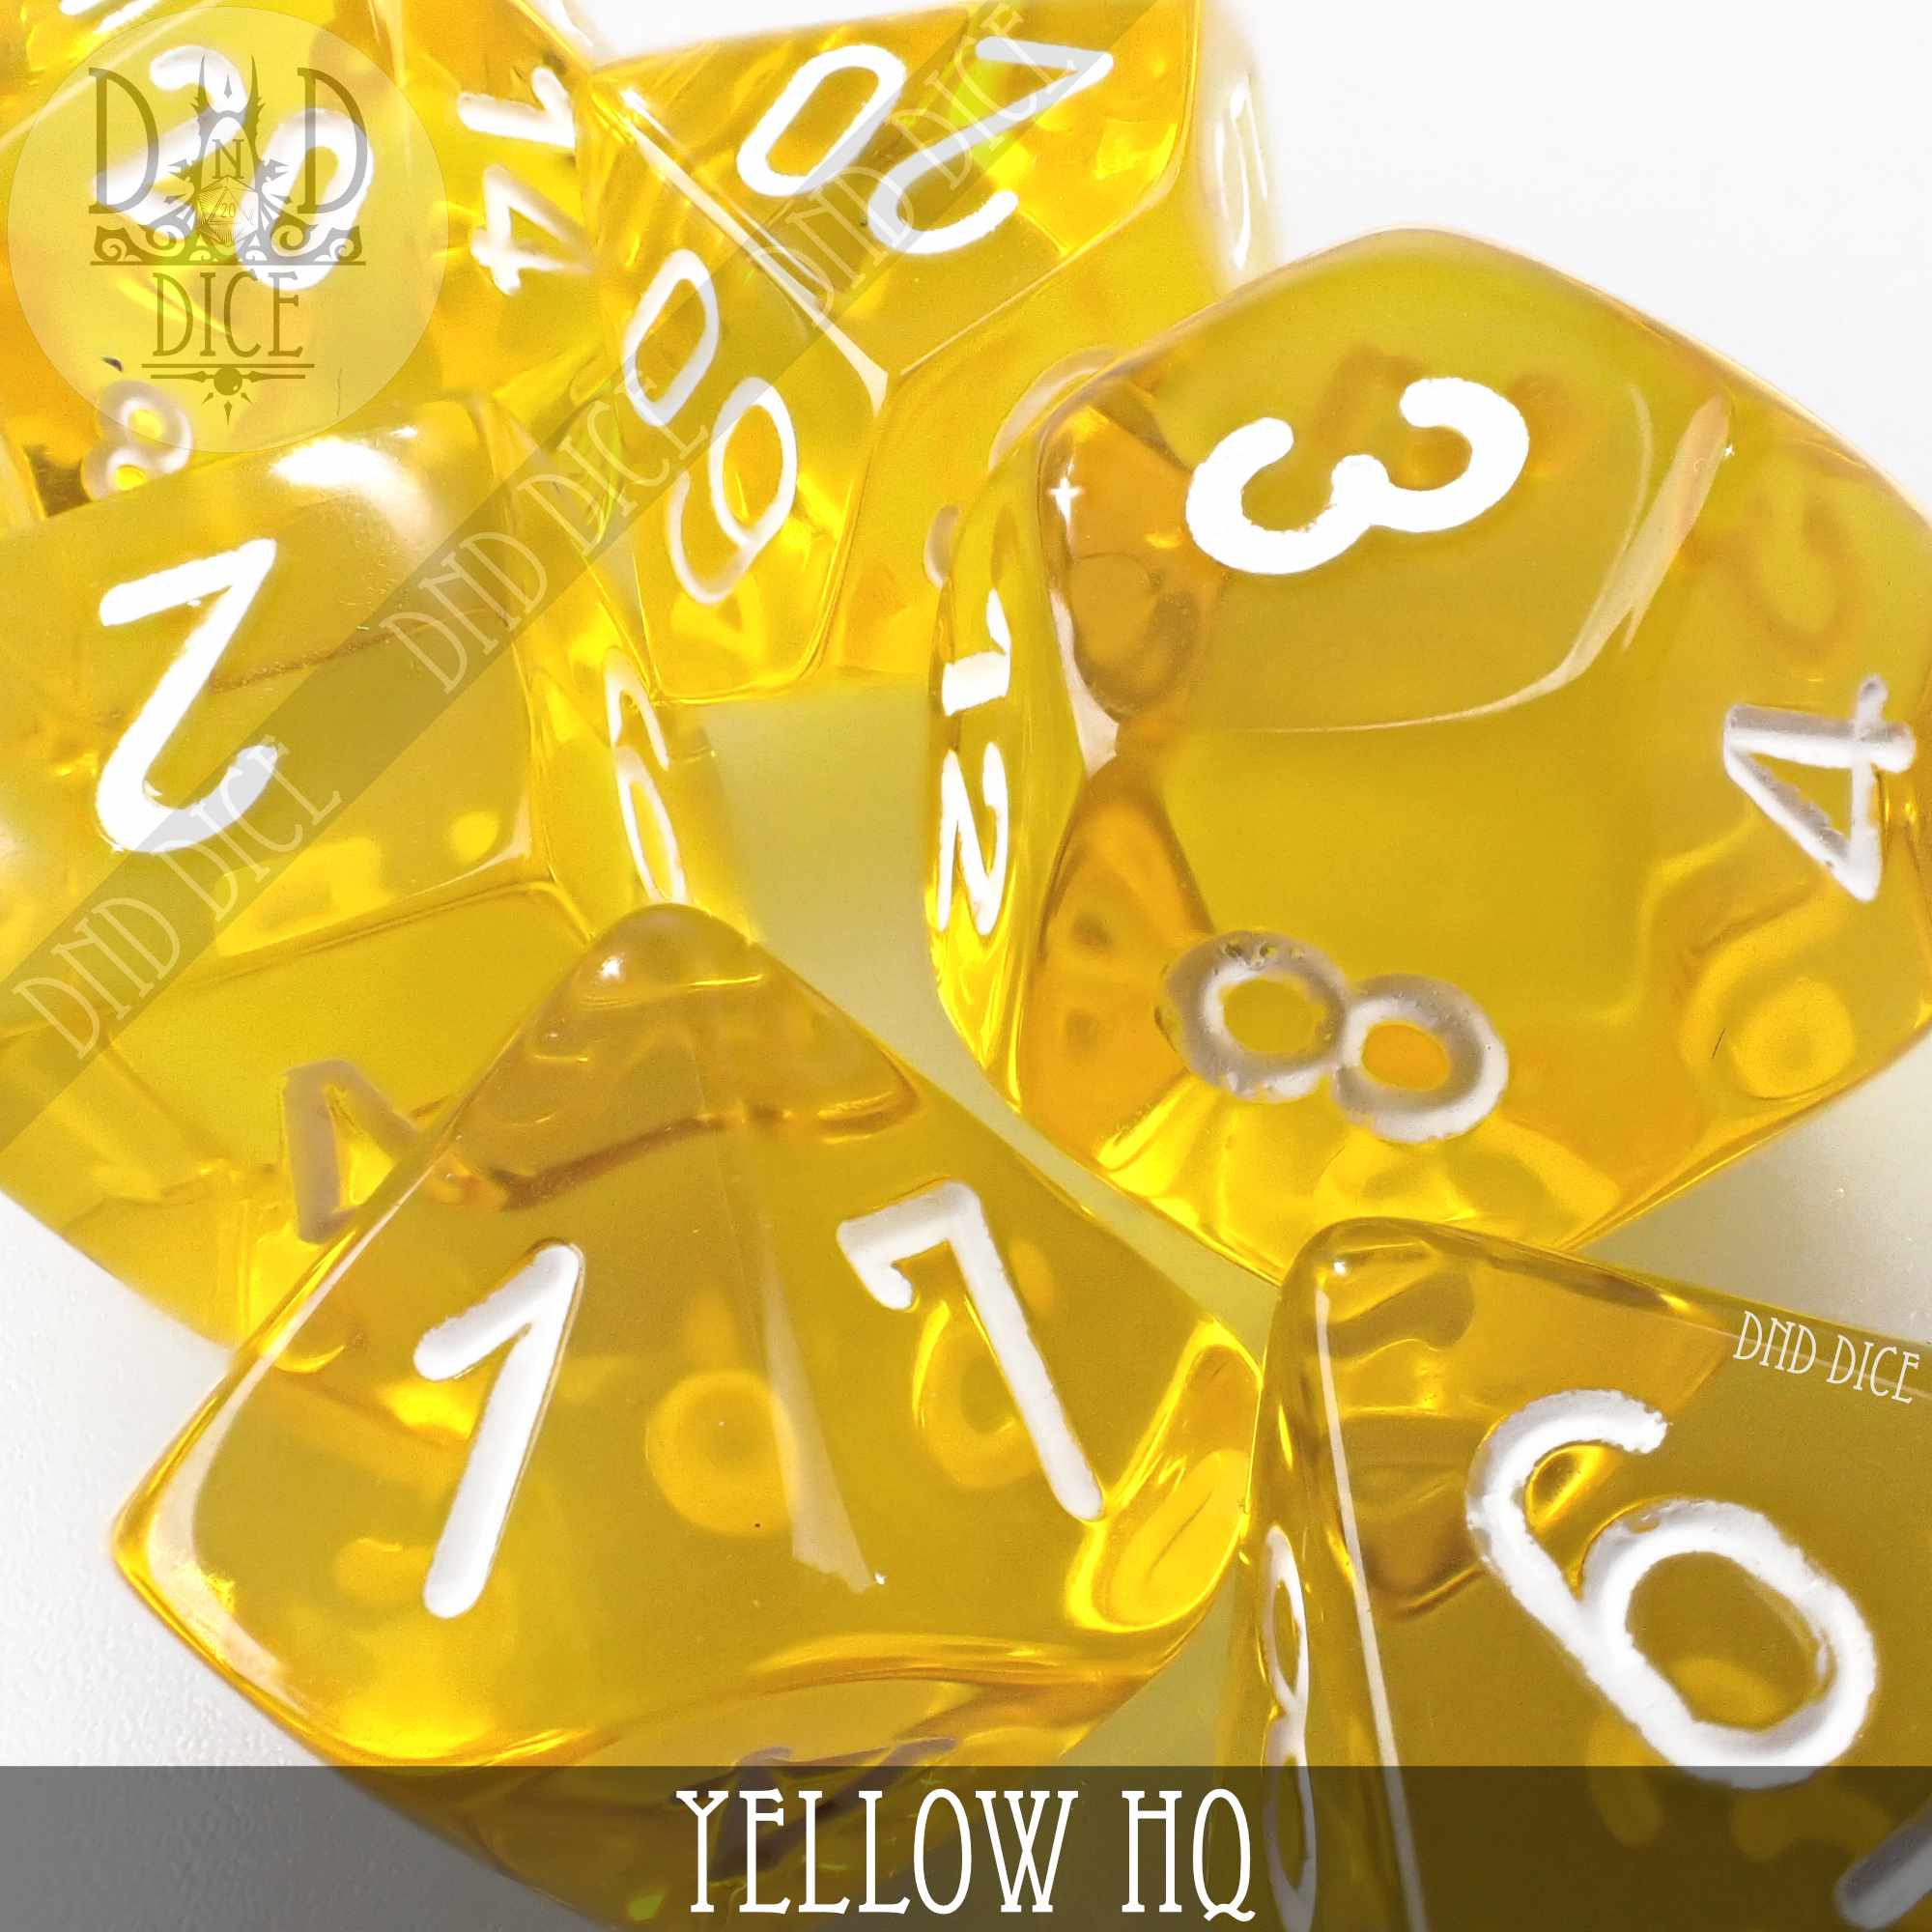 Yellow HQ Build Your Own Set